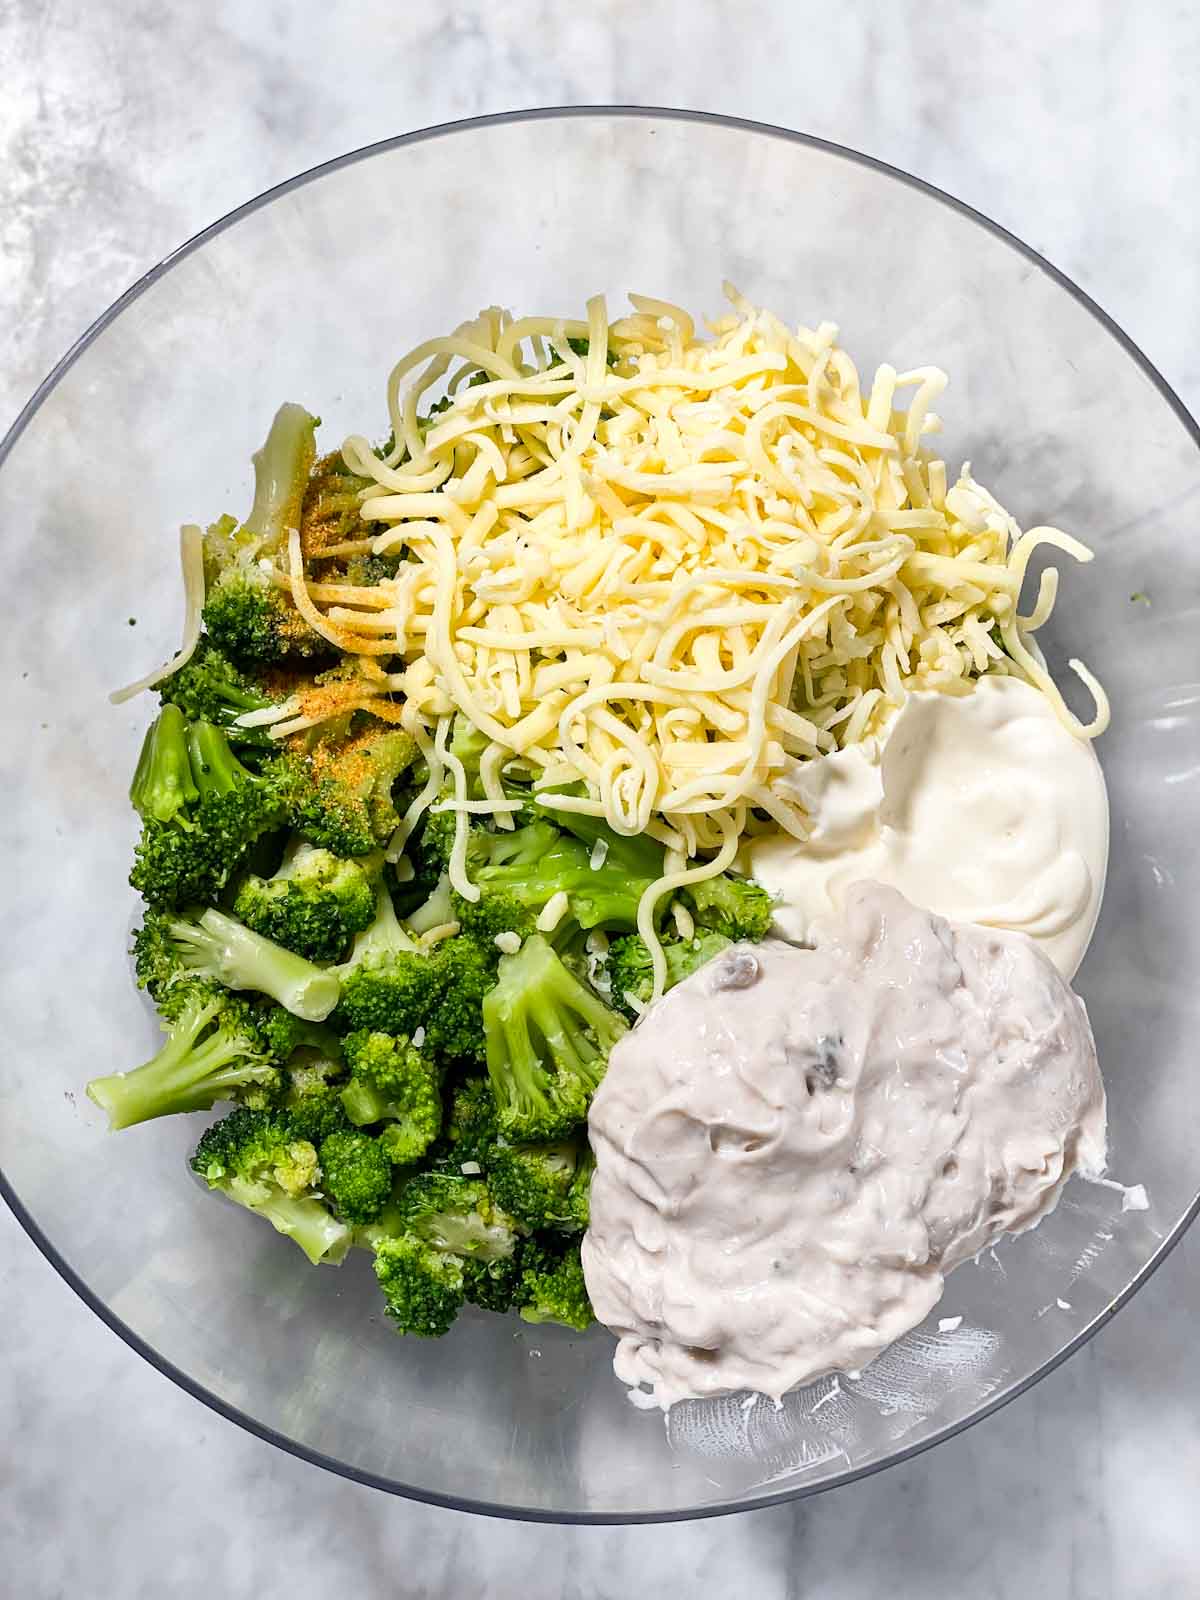 ingredients for ritz broccoli casserole in glass bowl